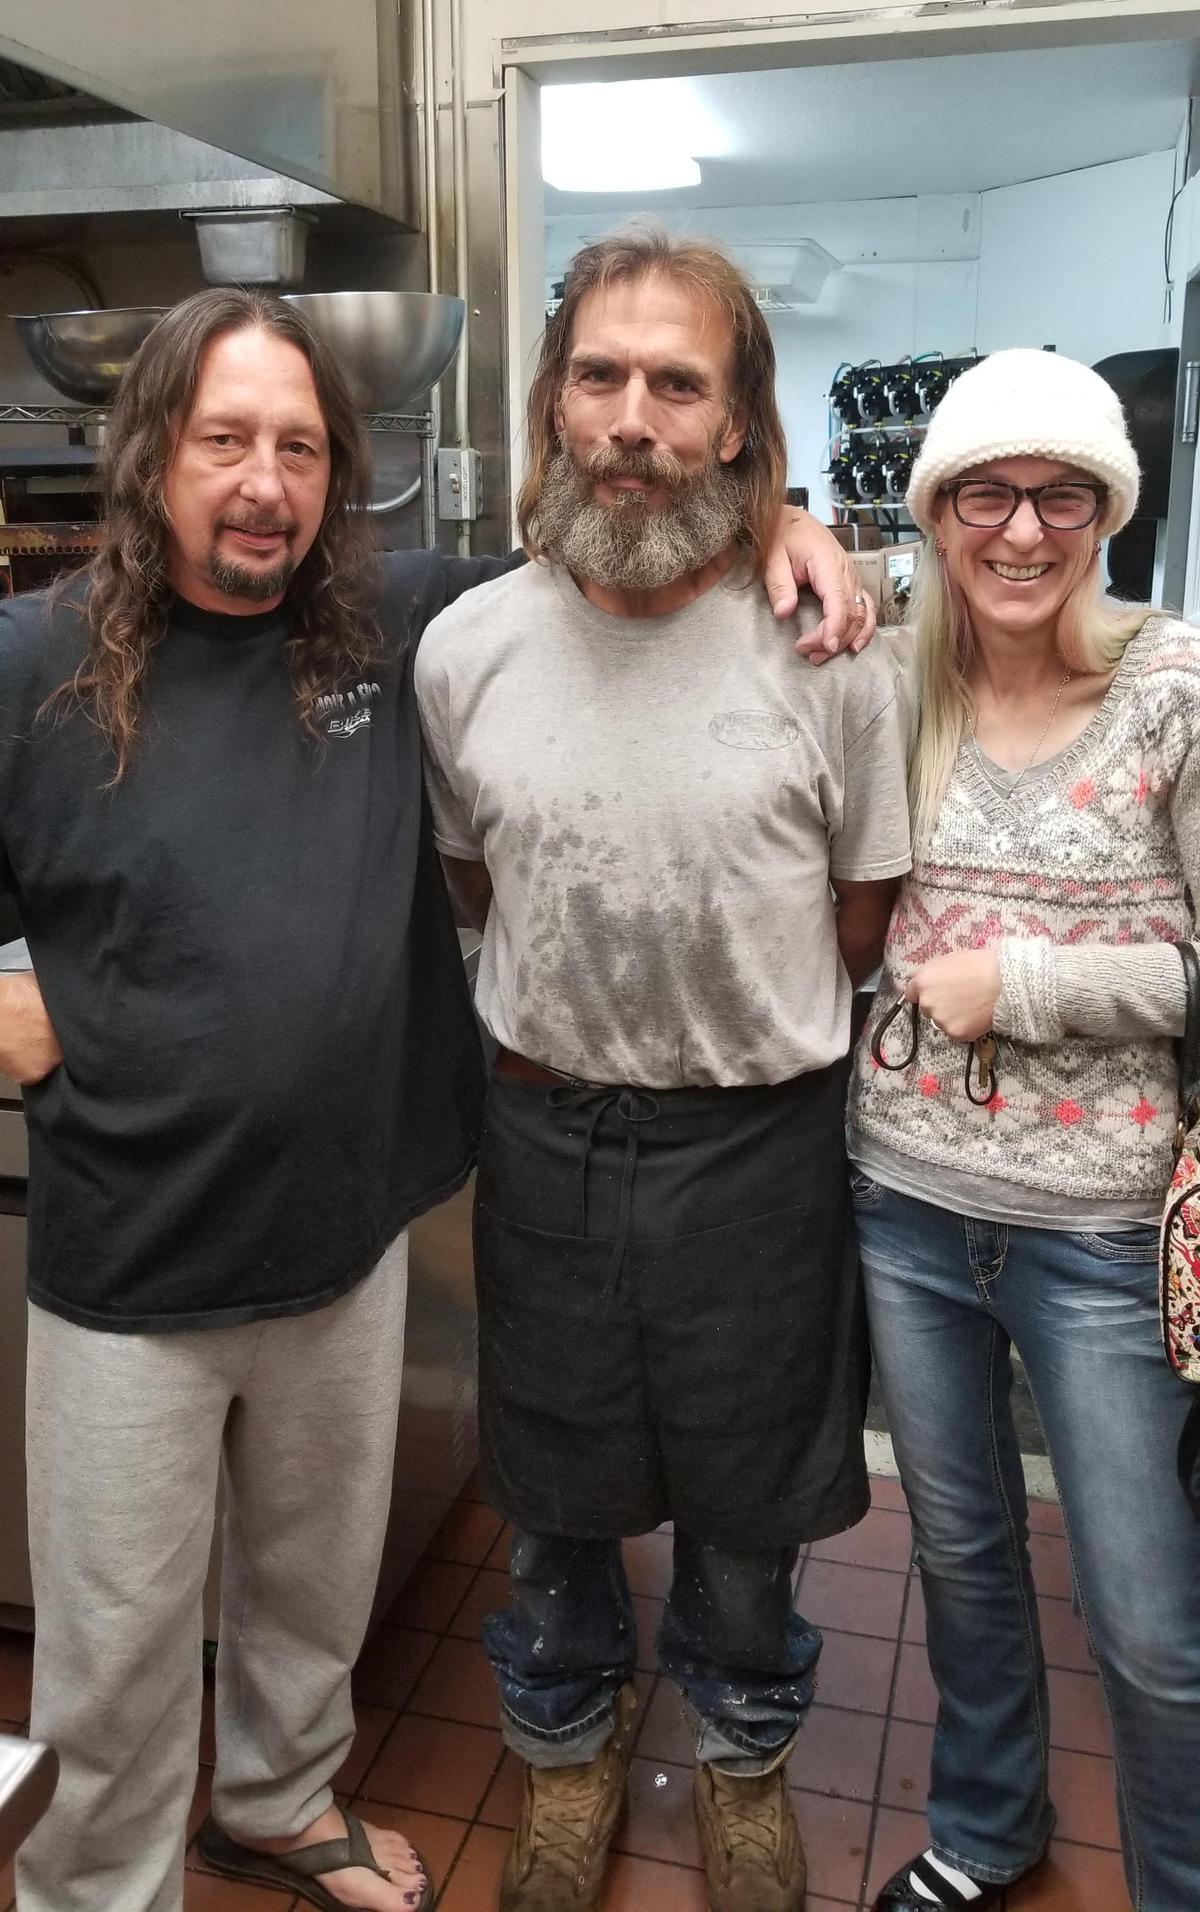 Chuck (C) with owners of Jessie Jean’s cafe, Ron and Anna Davidson. (Courtesy of Anna Davidson)